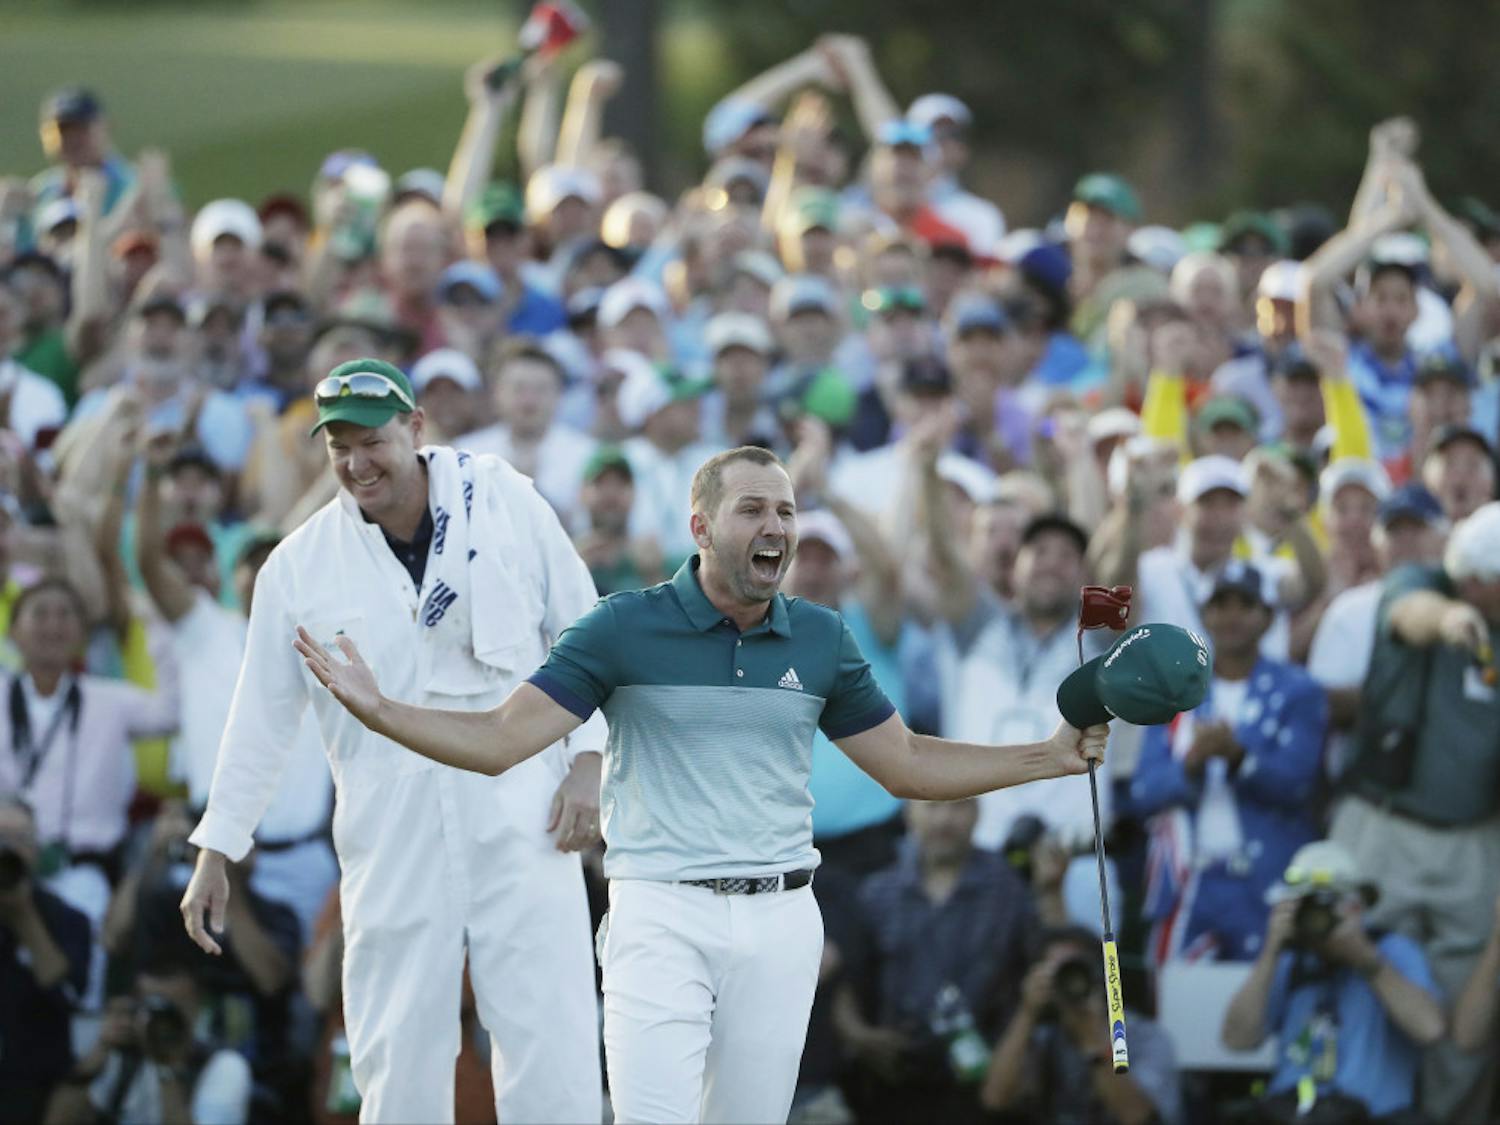 Sergio Garcia, of Spain, reacts after making his birdie putt on the 18th green to win the Masters golf tournament after a playoff Sunday, April 9, 2017, in Augusta, Ga. (AP Photo/David Goldman)